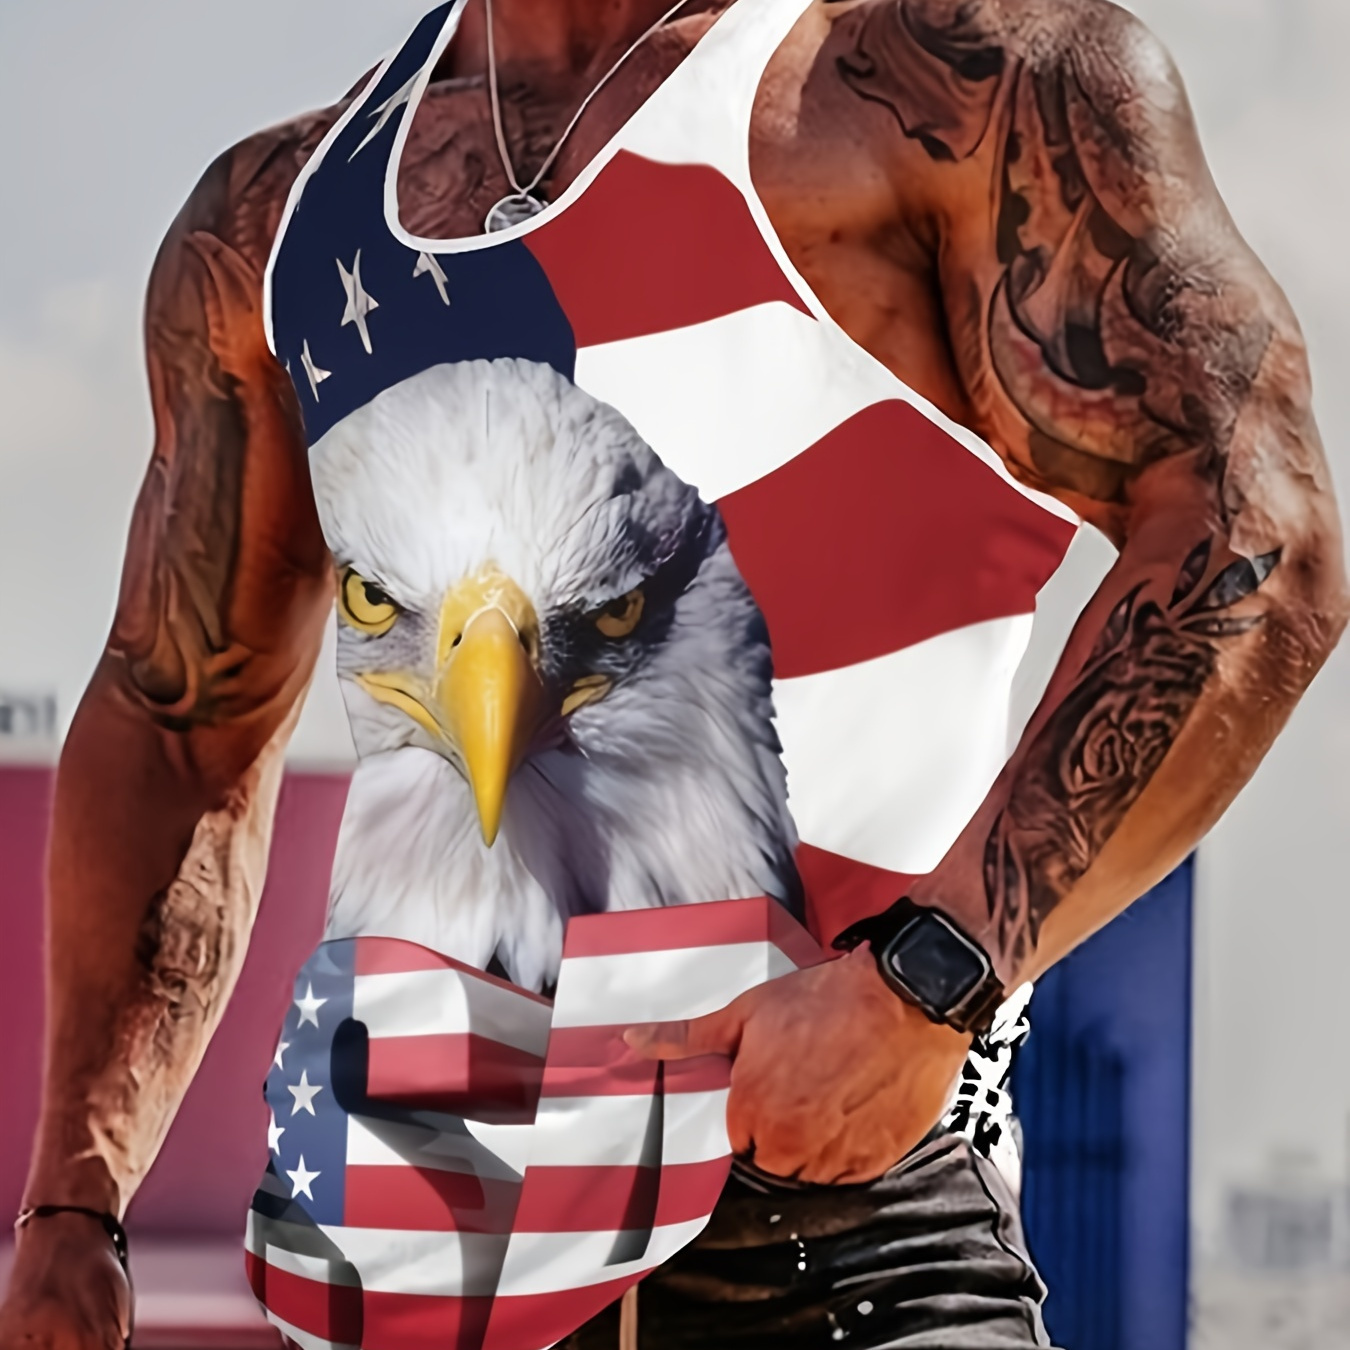 

Bald Eagle Us Flag Print A-shirt Tanks, Sleeveless Tank Top, Lightweight Active Undershirts, For Workout At The Gym, Bodybuilding, And Fitness, As Gifts